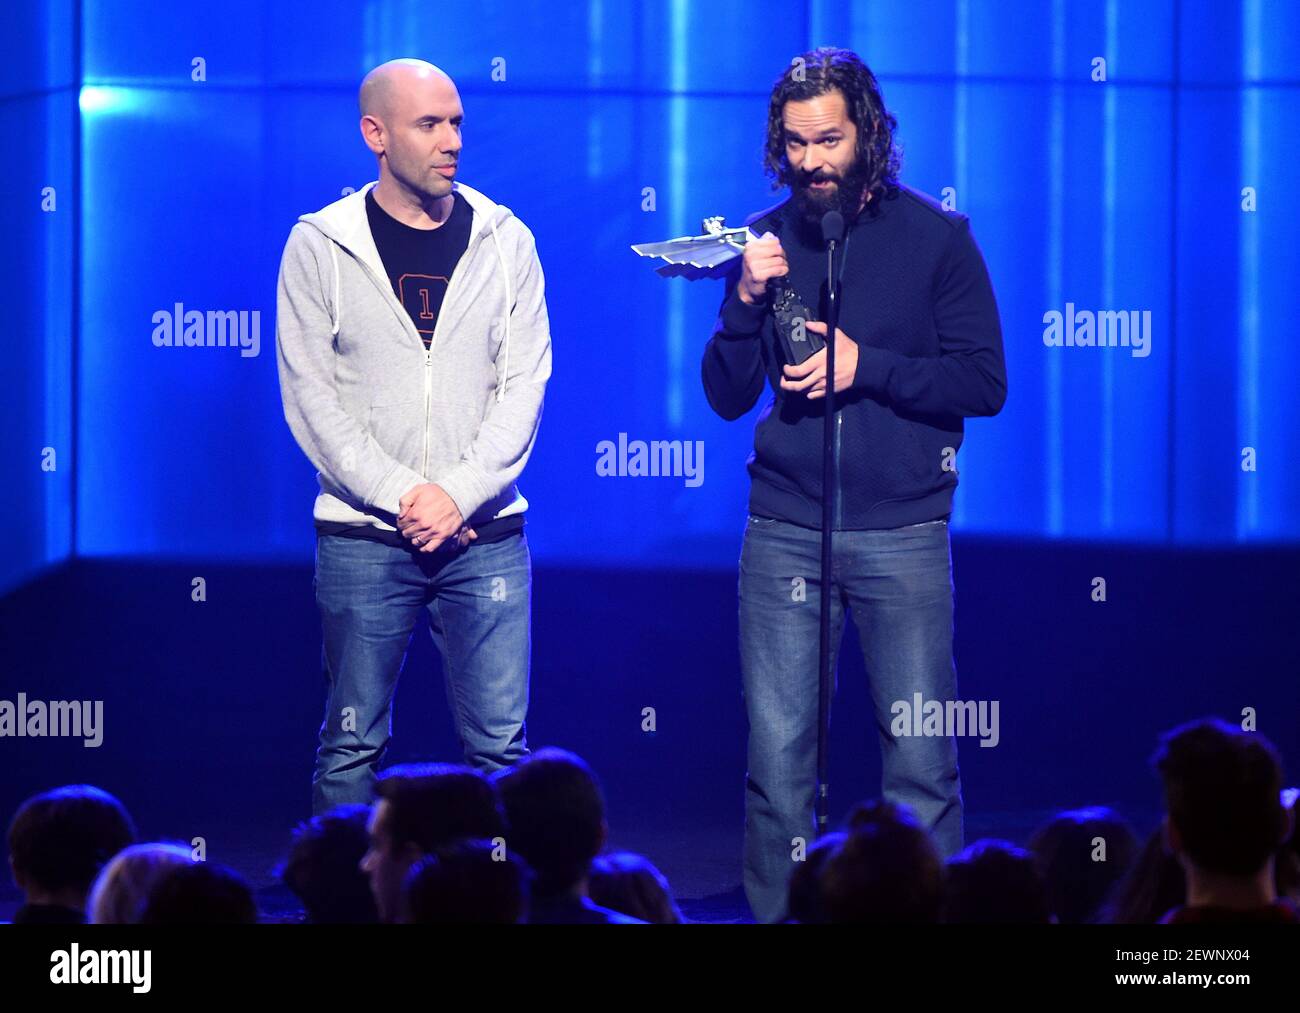 LOS ANGELES, CA - DECEMBER 1: Neil Druckmann (R) accepts the Best Narrative  award for Uncharted 4: A Thief's End onstage at The Game Awards 2016 at  the Microsoft Theater on December